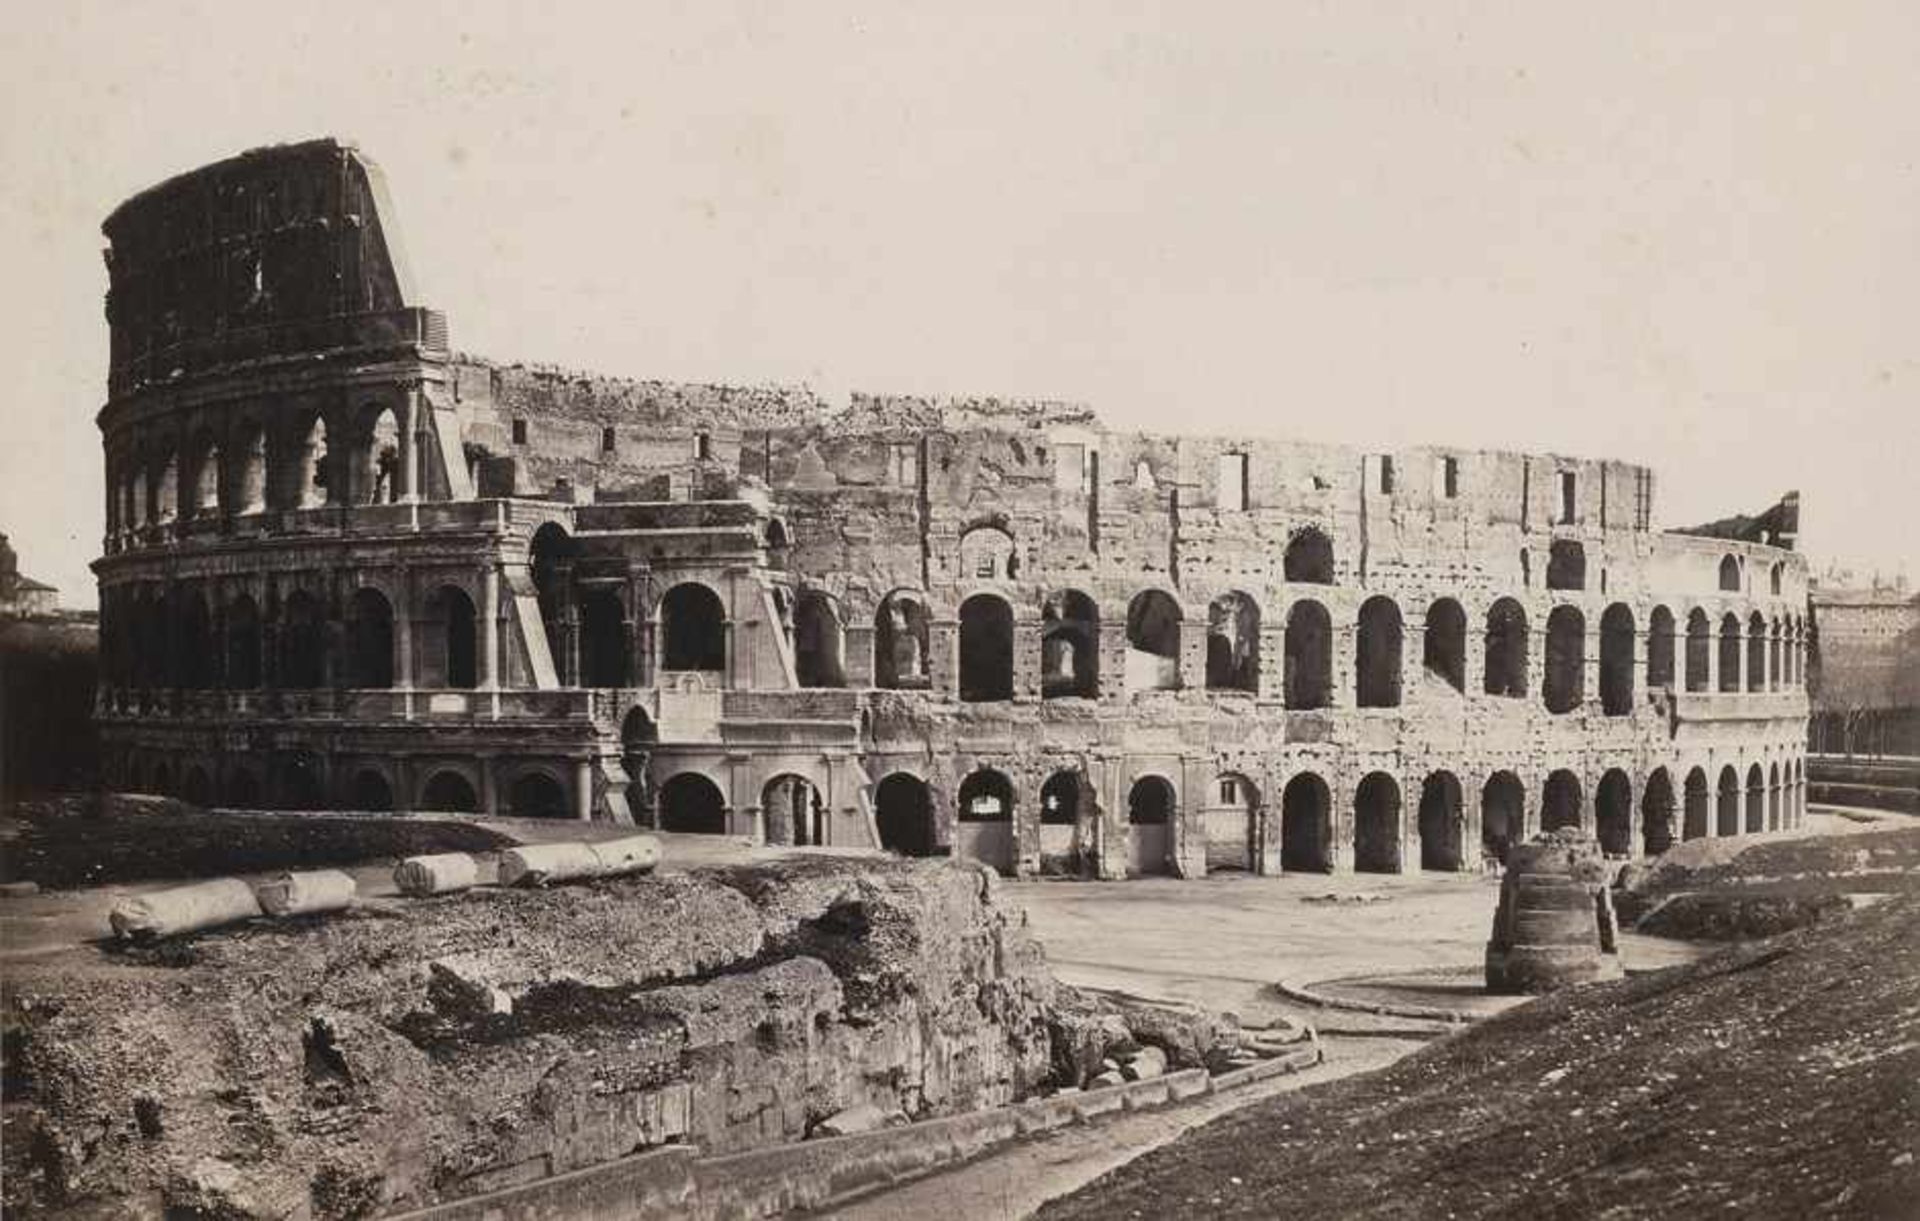 Anderson, James: View of the Colosseum; Piazza del Popolo, Rome View of the Colosseum; View of